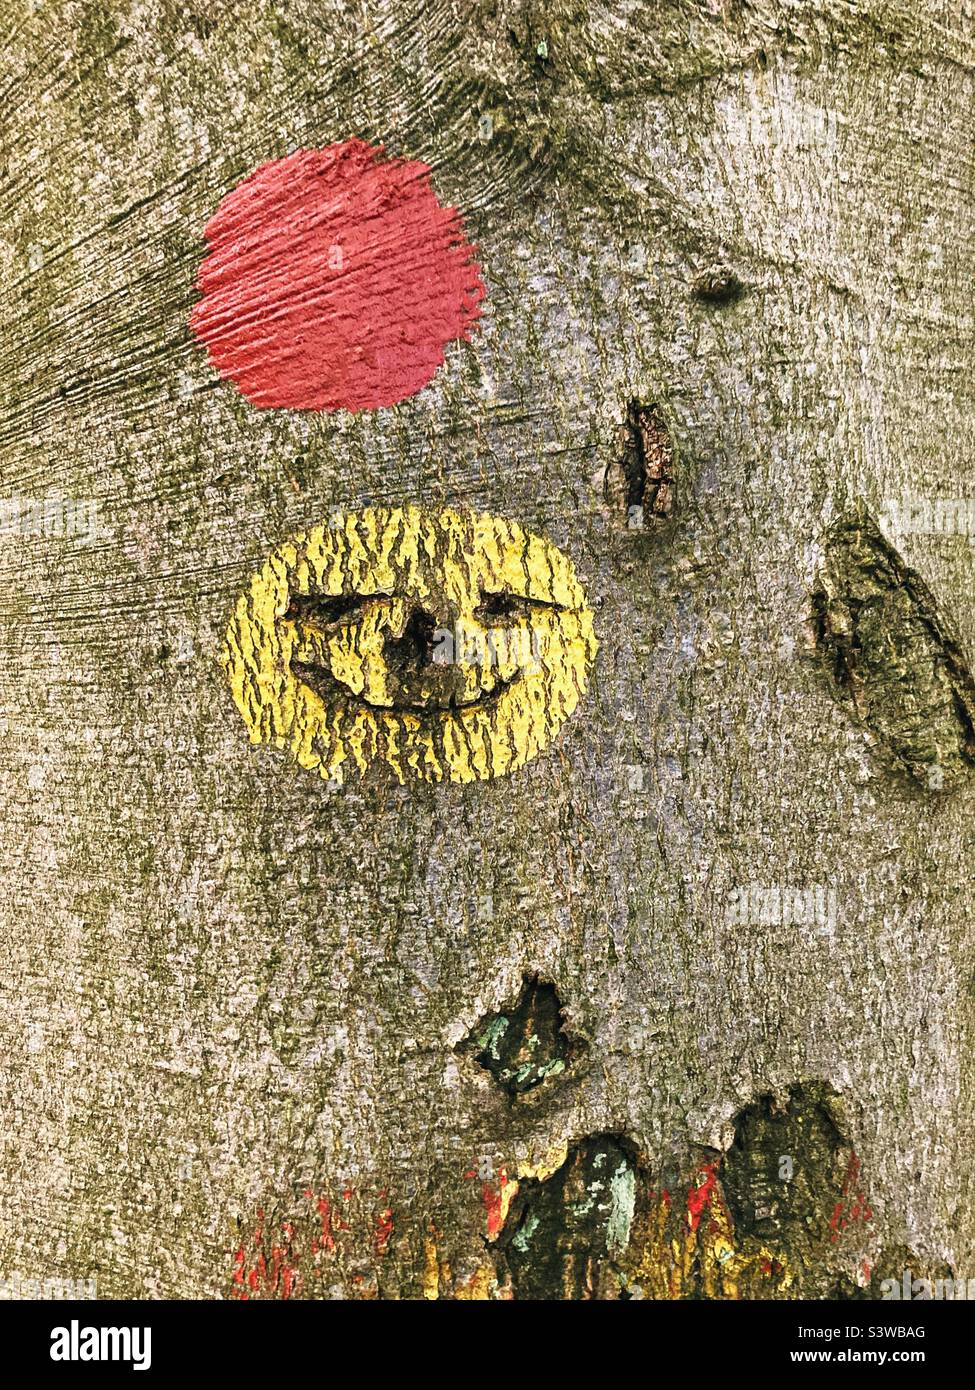 A yellow dot on a tree with mouth, eyes and a nose carved in it, resembling a grotesque smiley Emoji, a red dot indicating a hiking trail above it Stock Photo